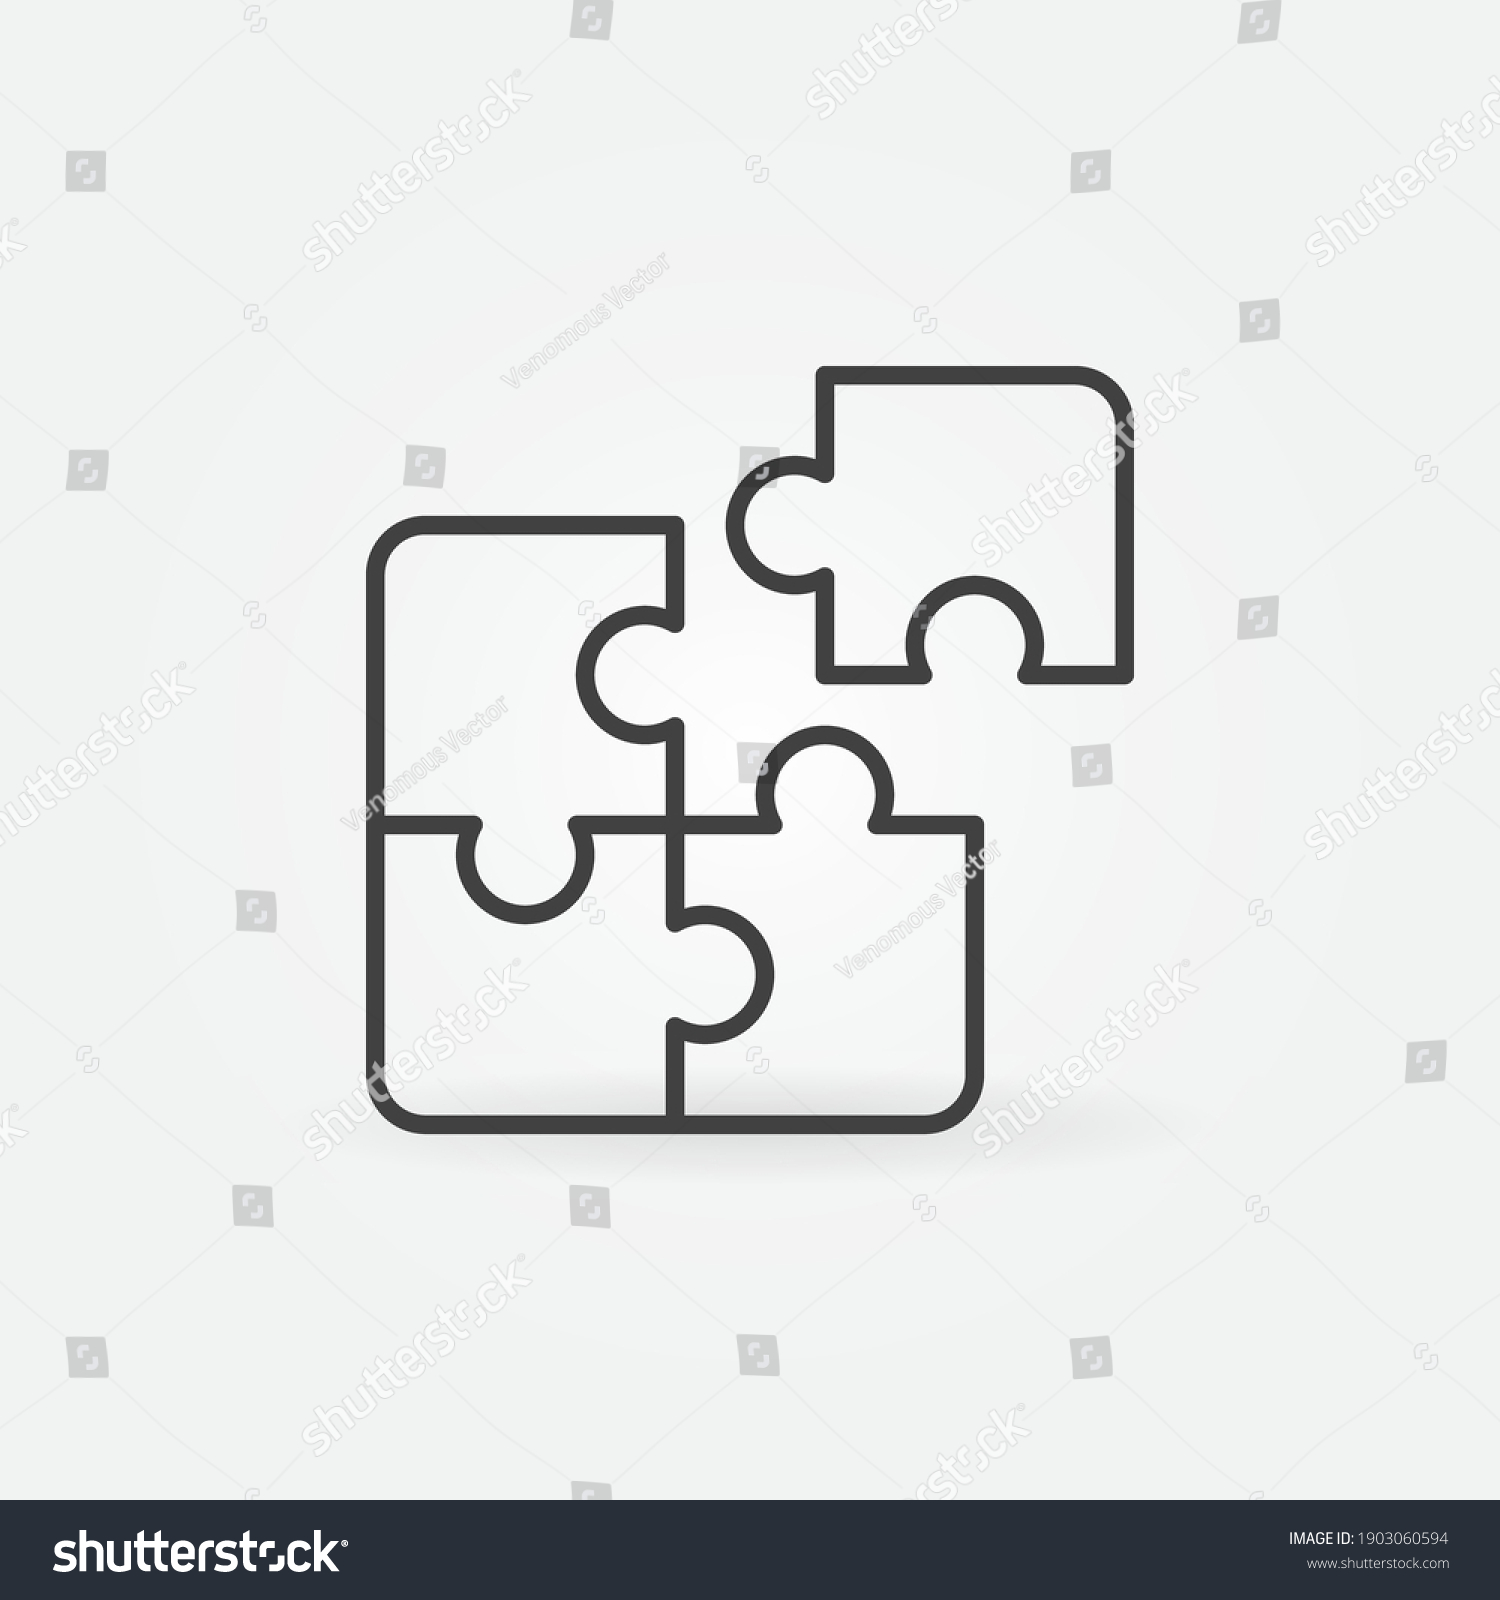 Puzzle Pieces vector concept simple icon or symbol in thin line style #1903060594